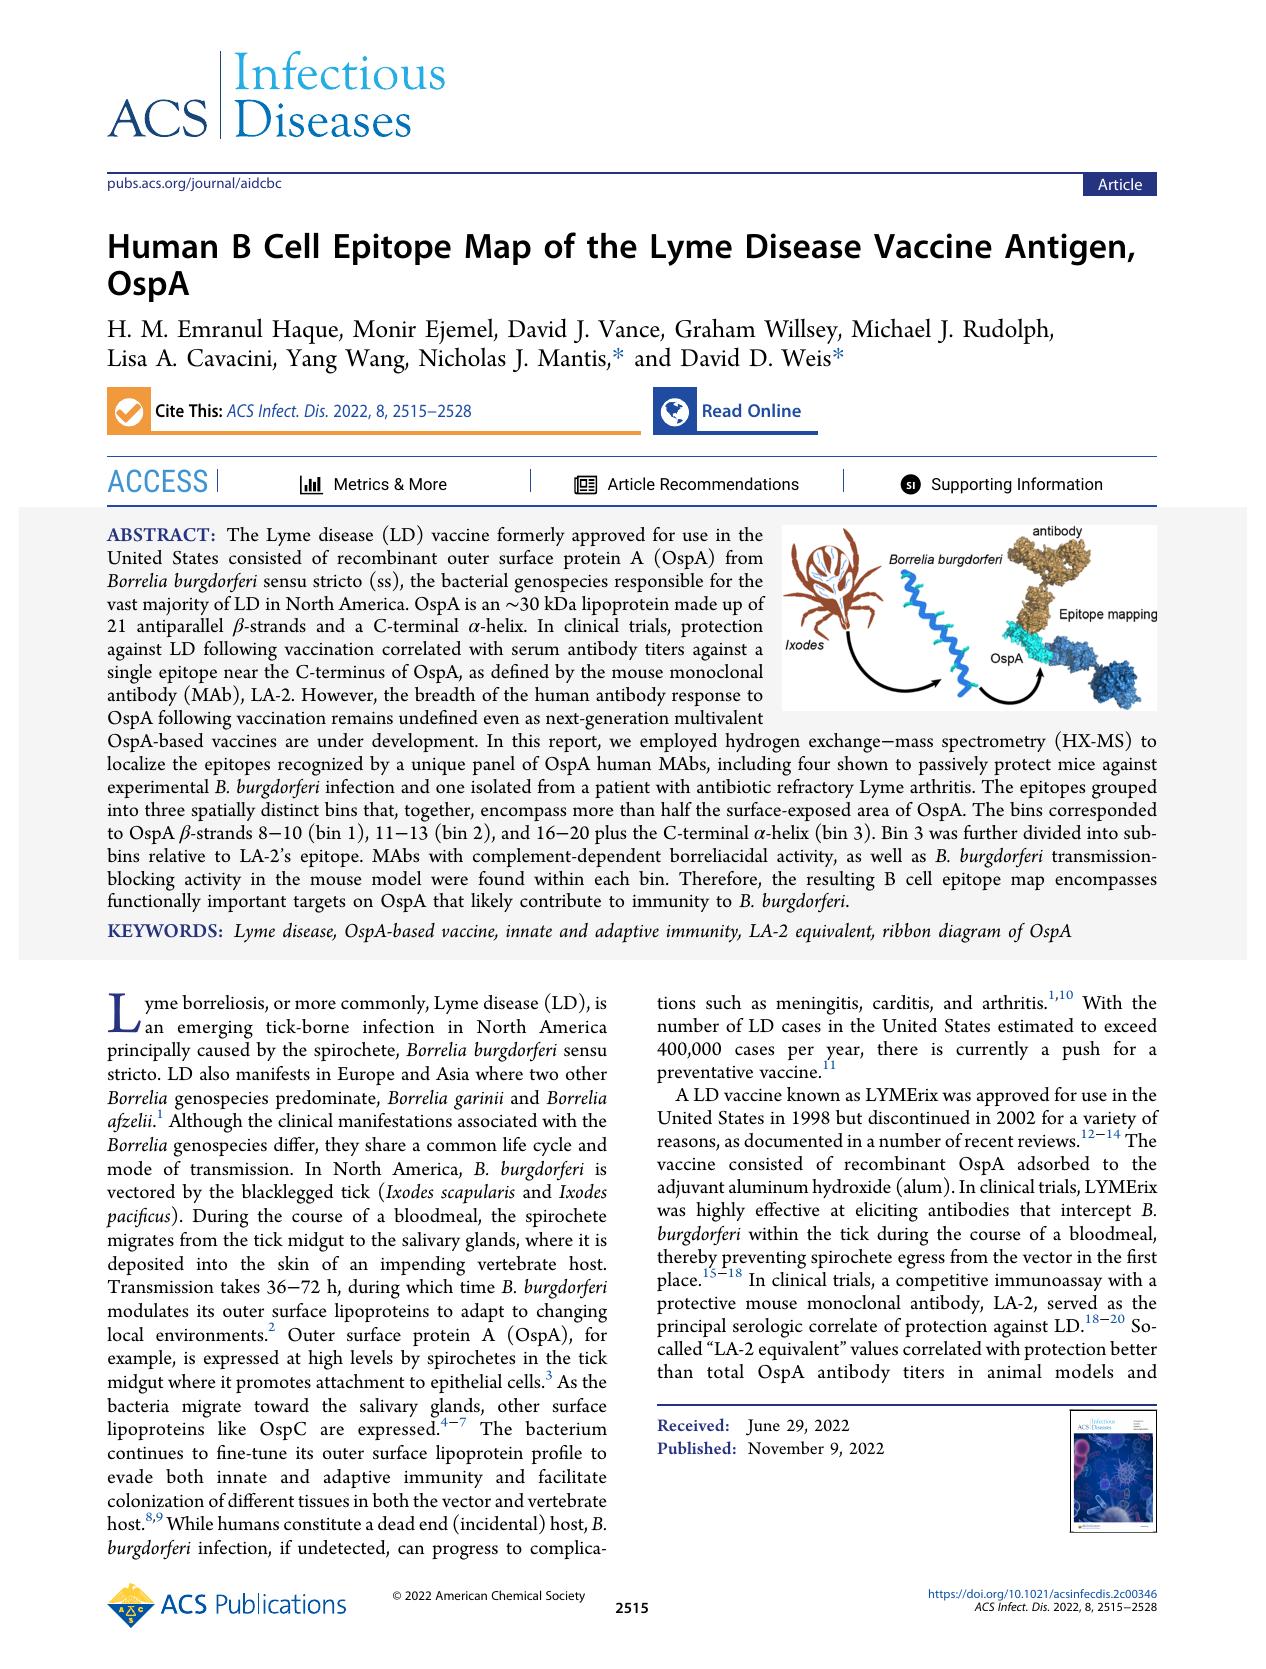 Human B Cell Epitope Map of the Lyme Disease Vaccine Antigen, OspA by unknow